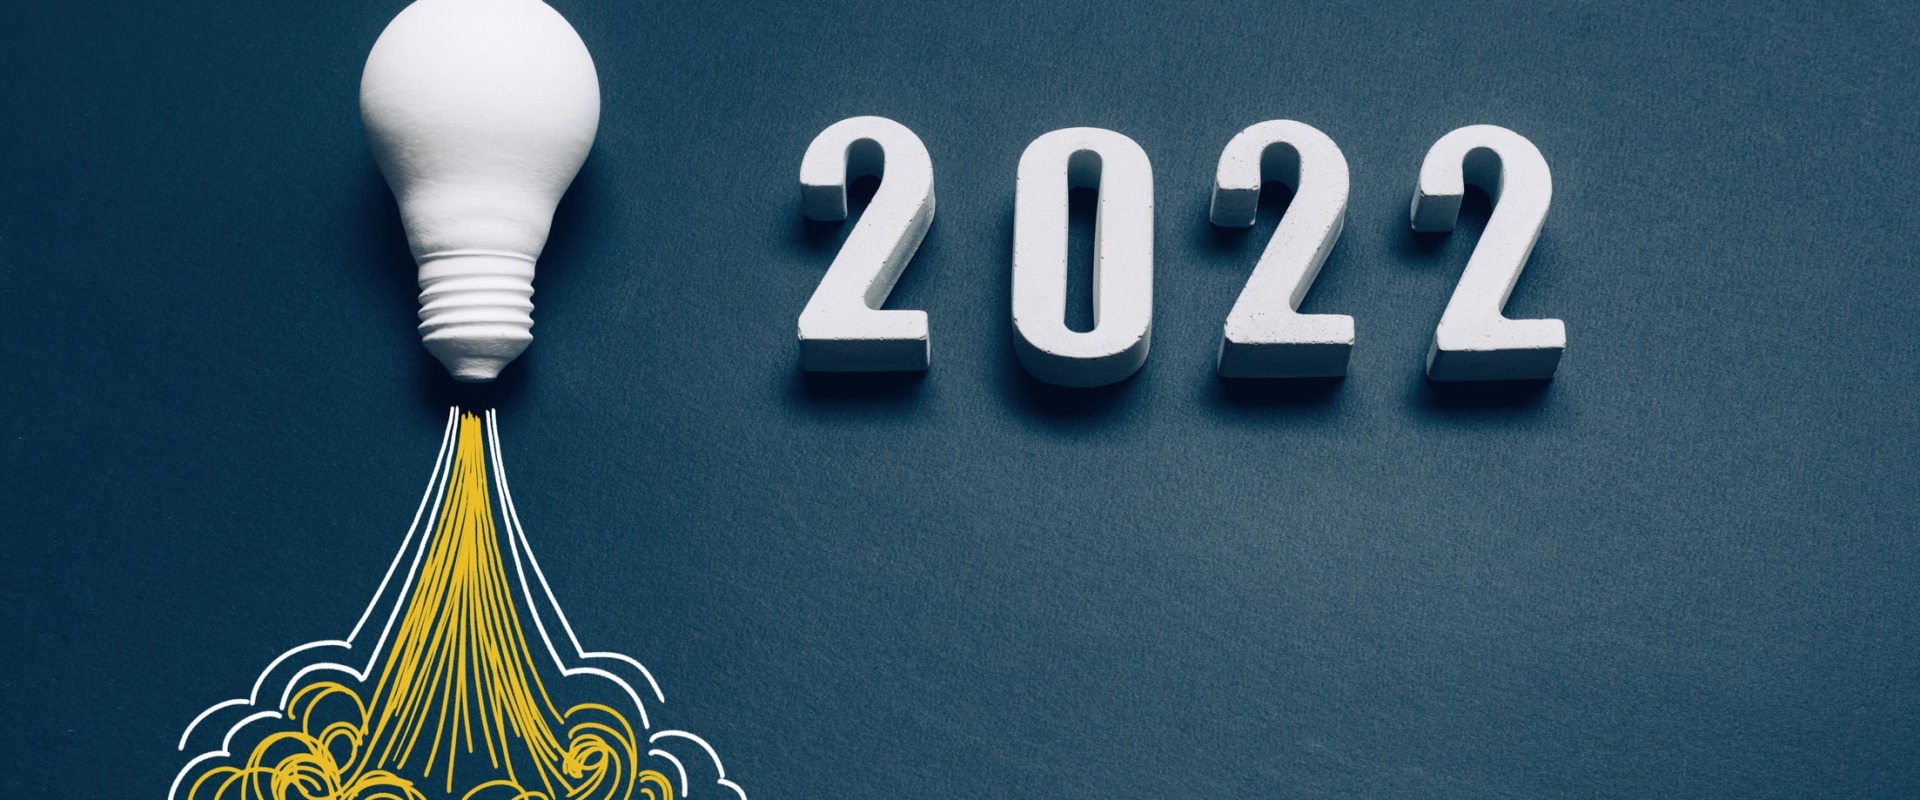 Will cryptocurrencies recover in 2022